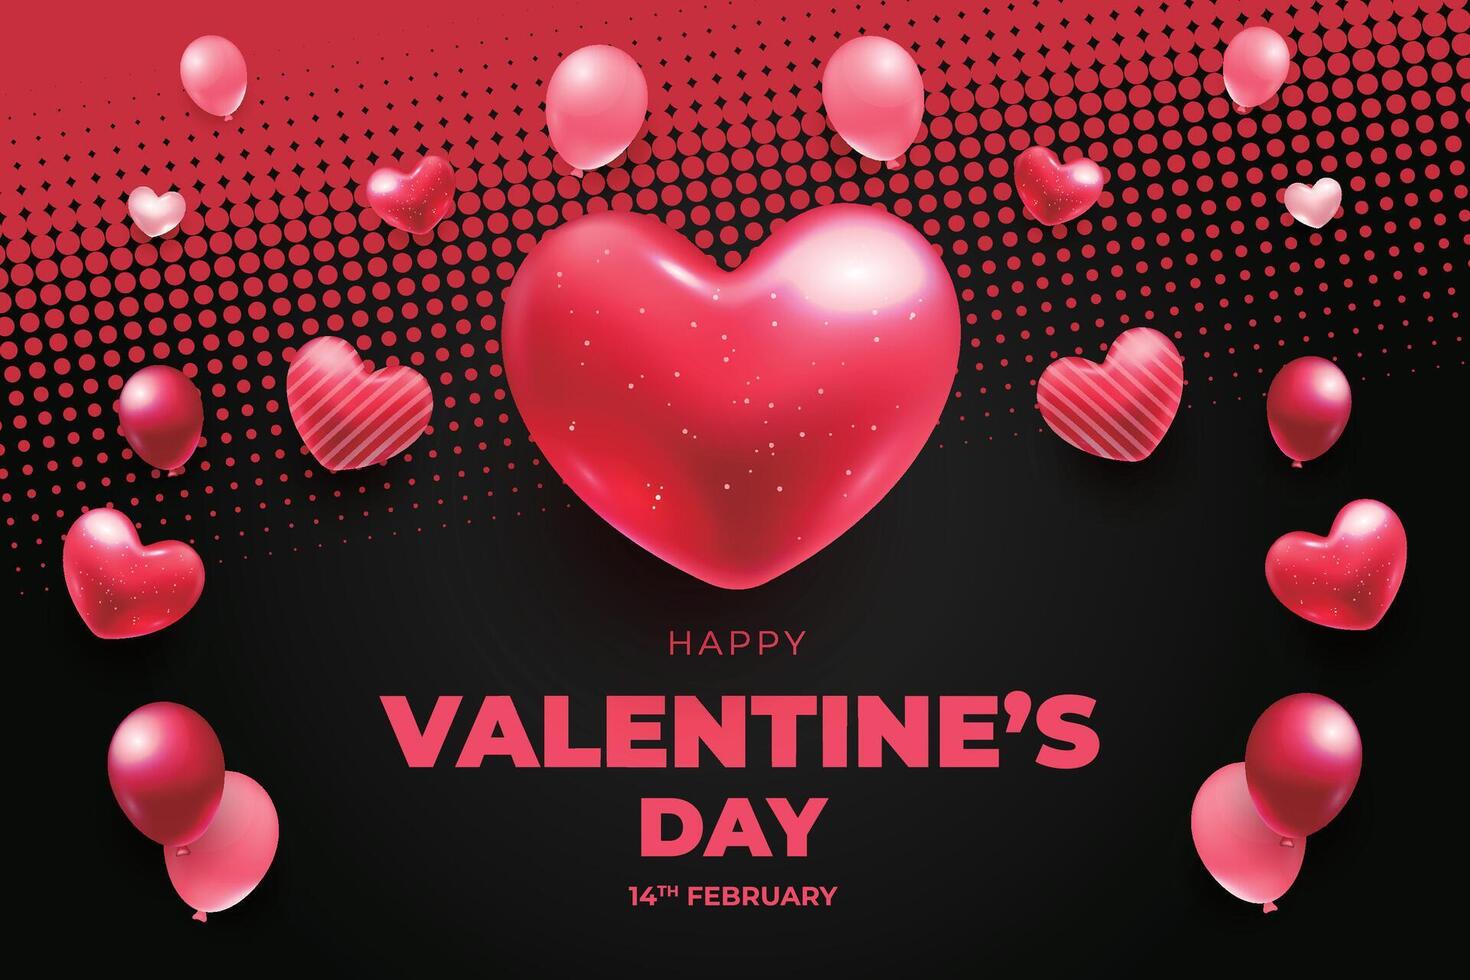 valentine's day background with red heart shaped balloons vector